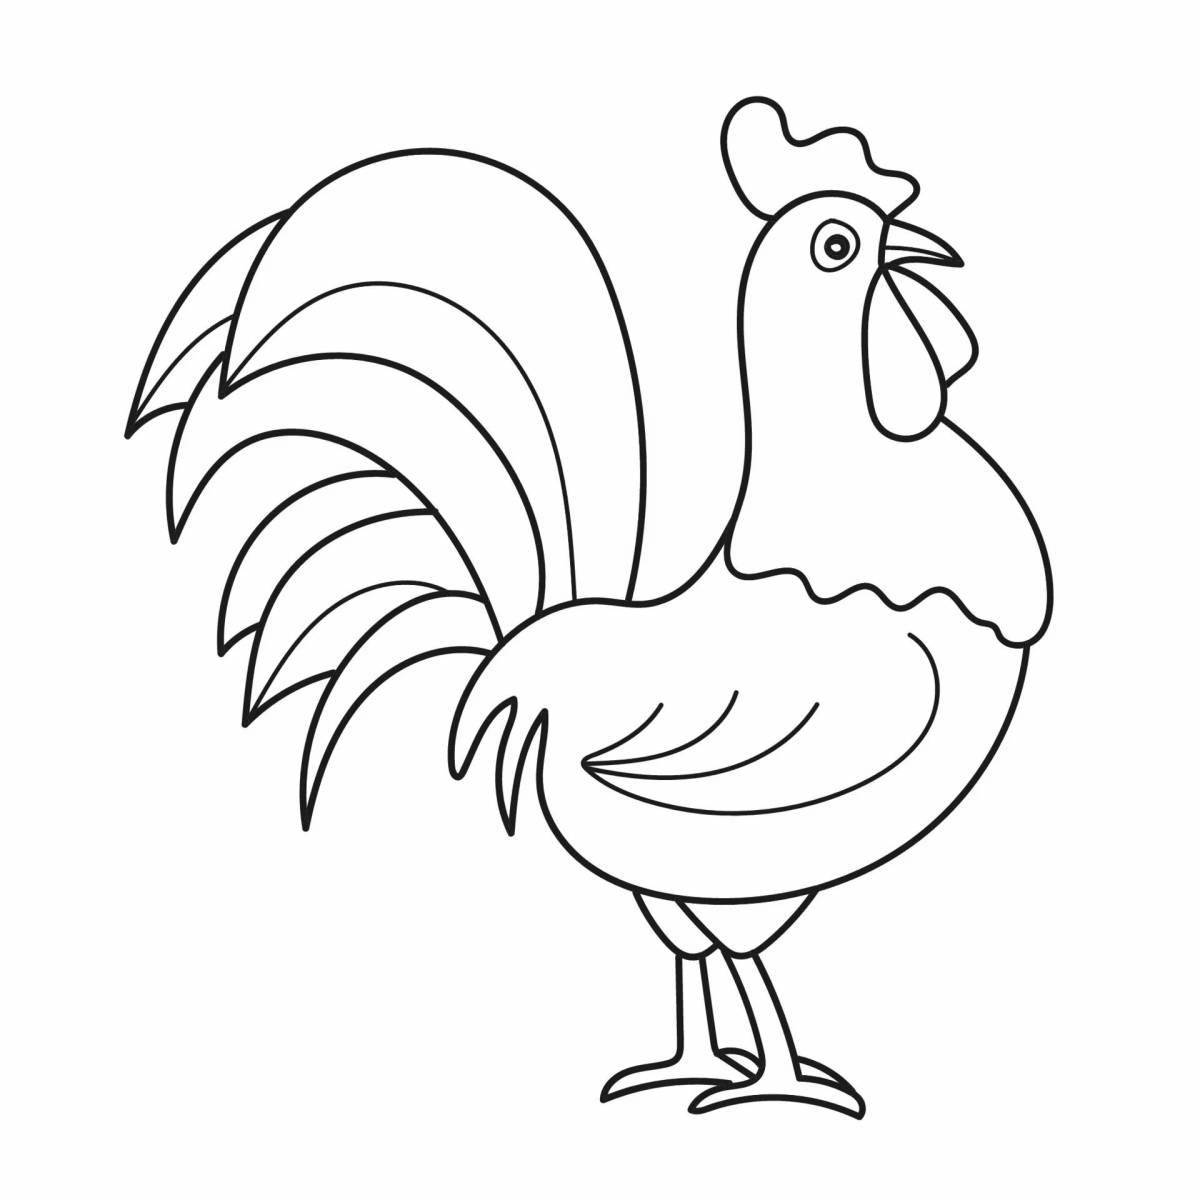 Coloring book cheerful rooster